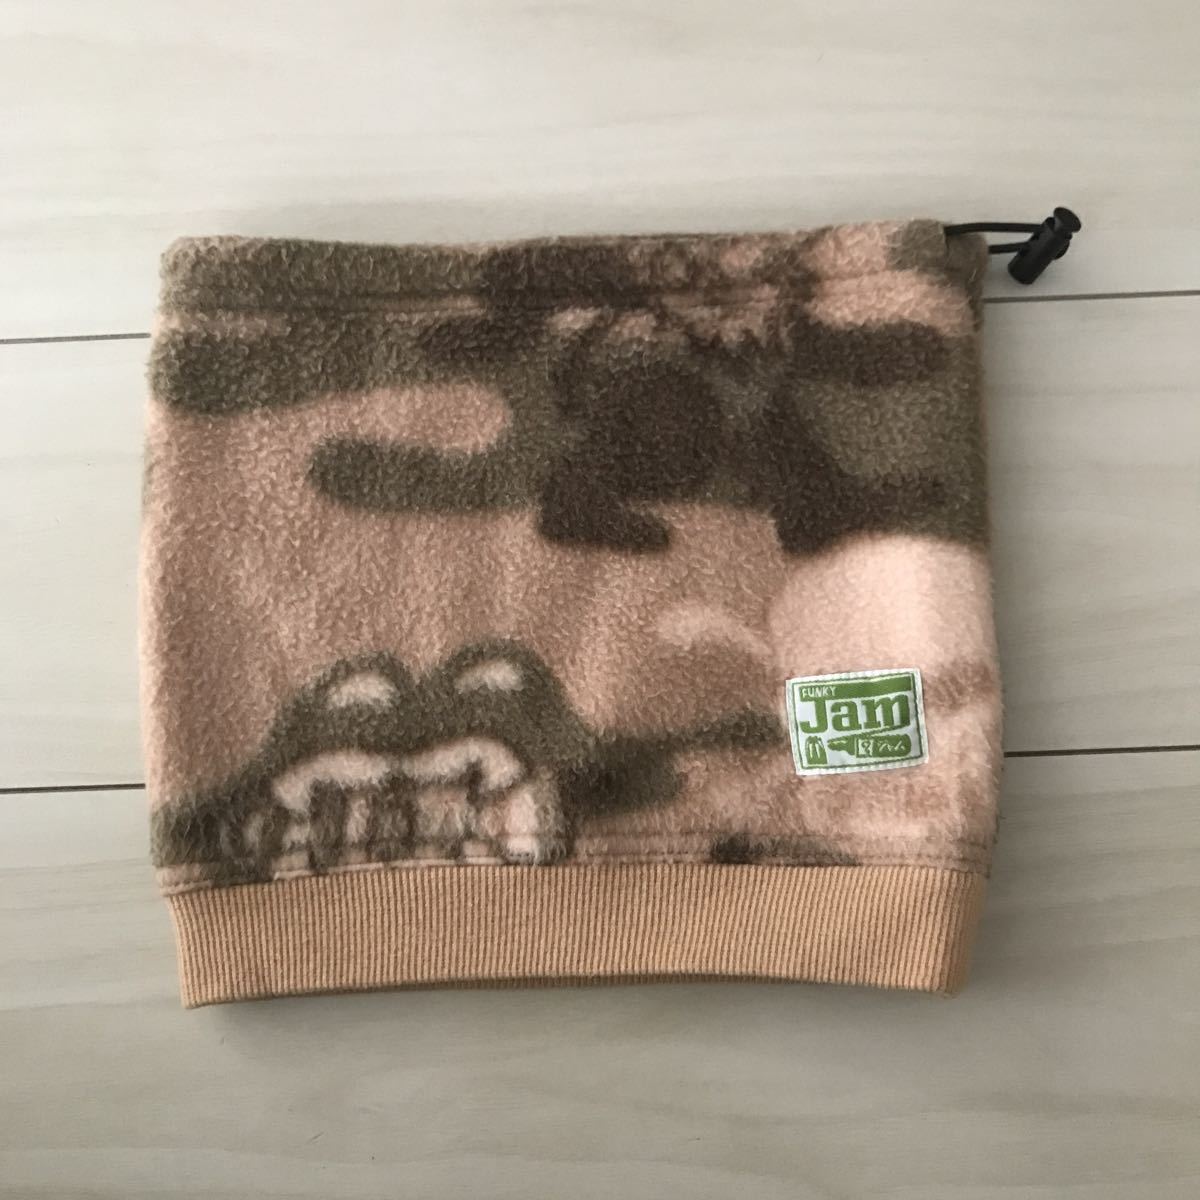 USED*JAM fleece neck warmer size S*gla gram - muchacha * retro old clothes snow play snow going to school commuting to kindergarten muffler protection against cold Skull skull 